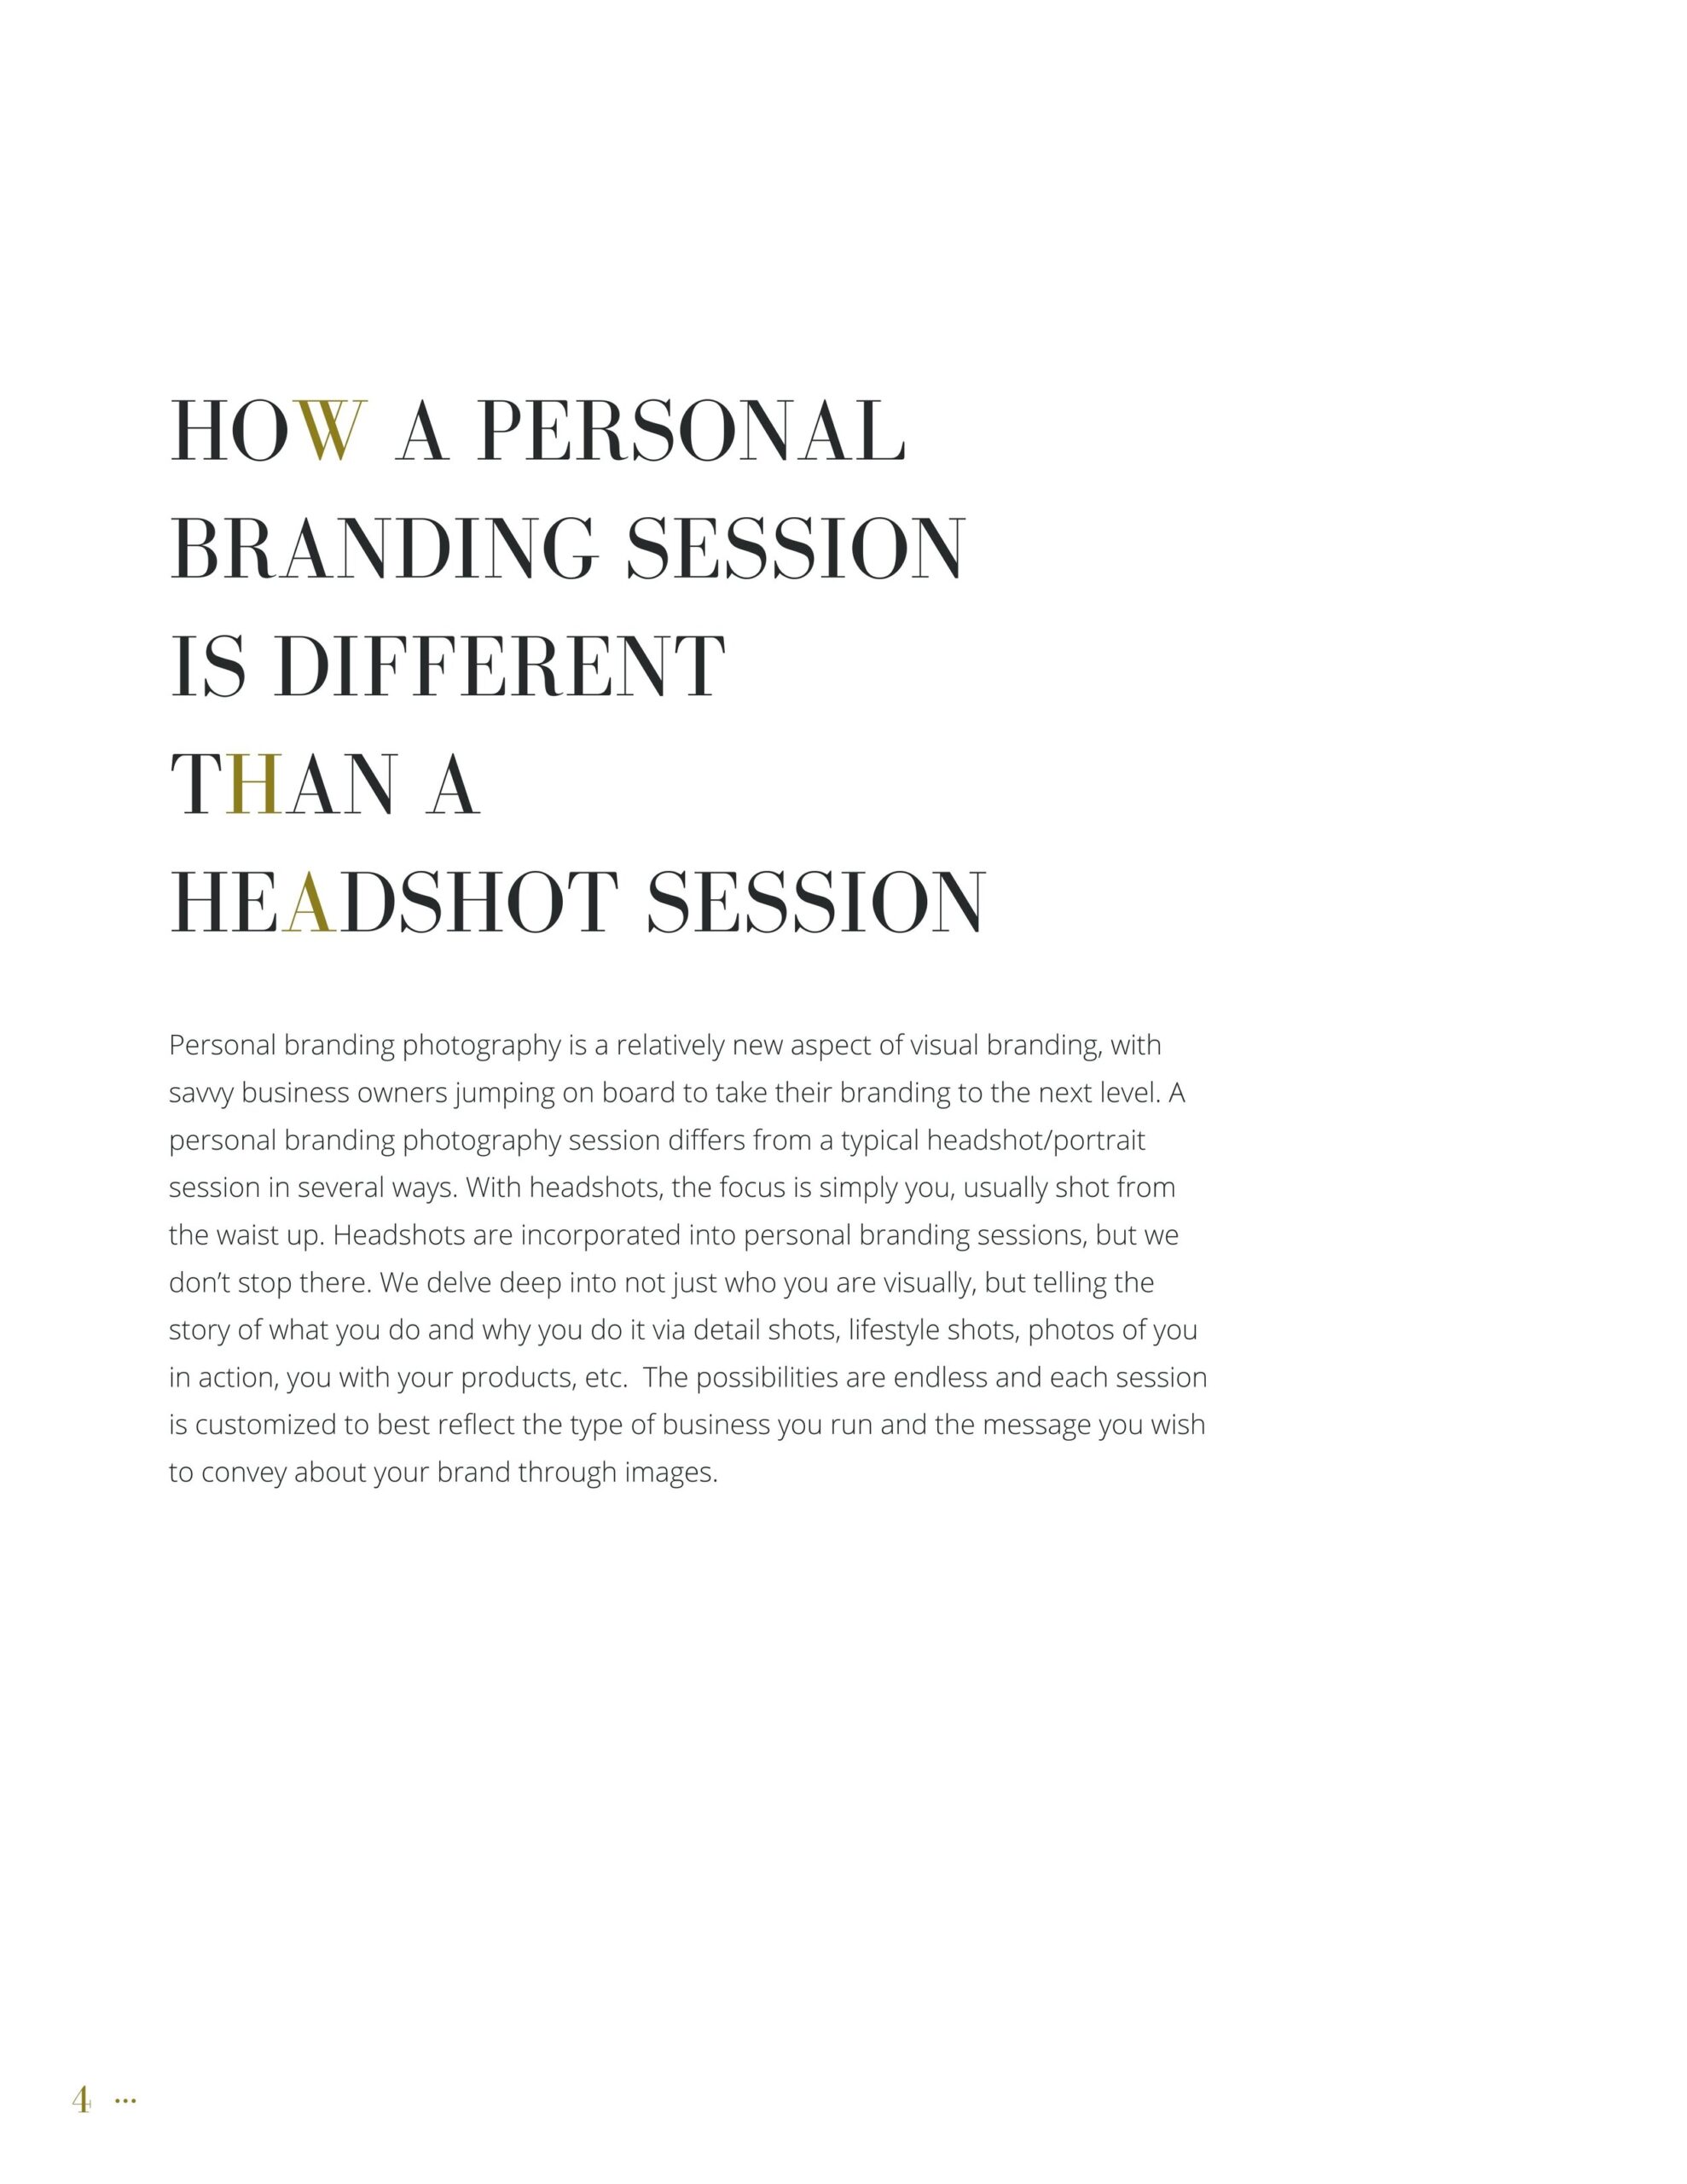 HOW A PERSONAL BRANDING SESSION IS DIFFERENT THAN A HEADSHOT SESSION.jpg